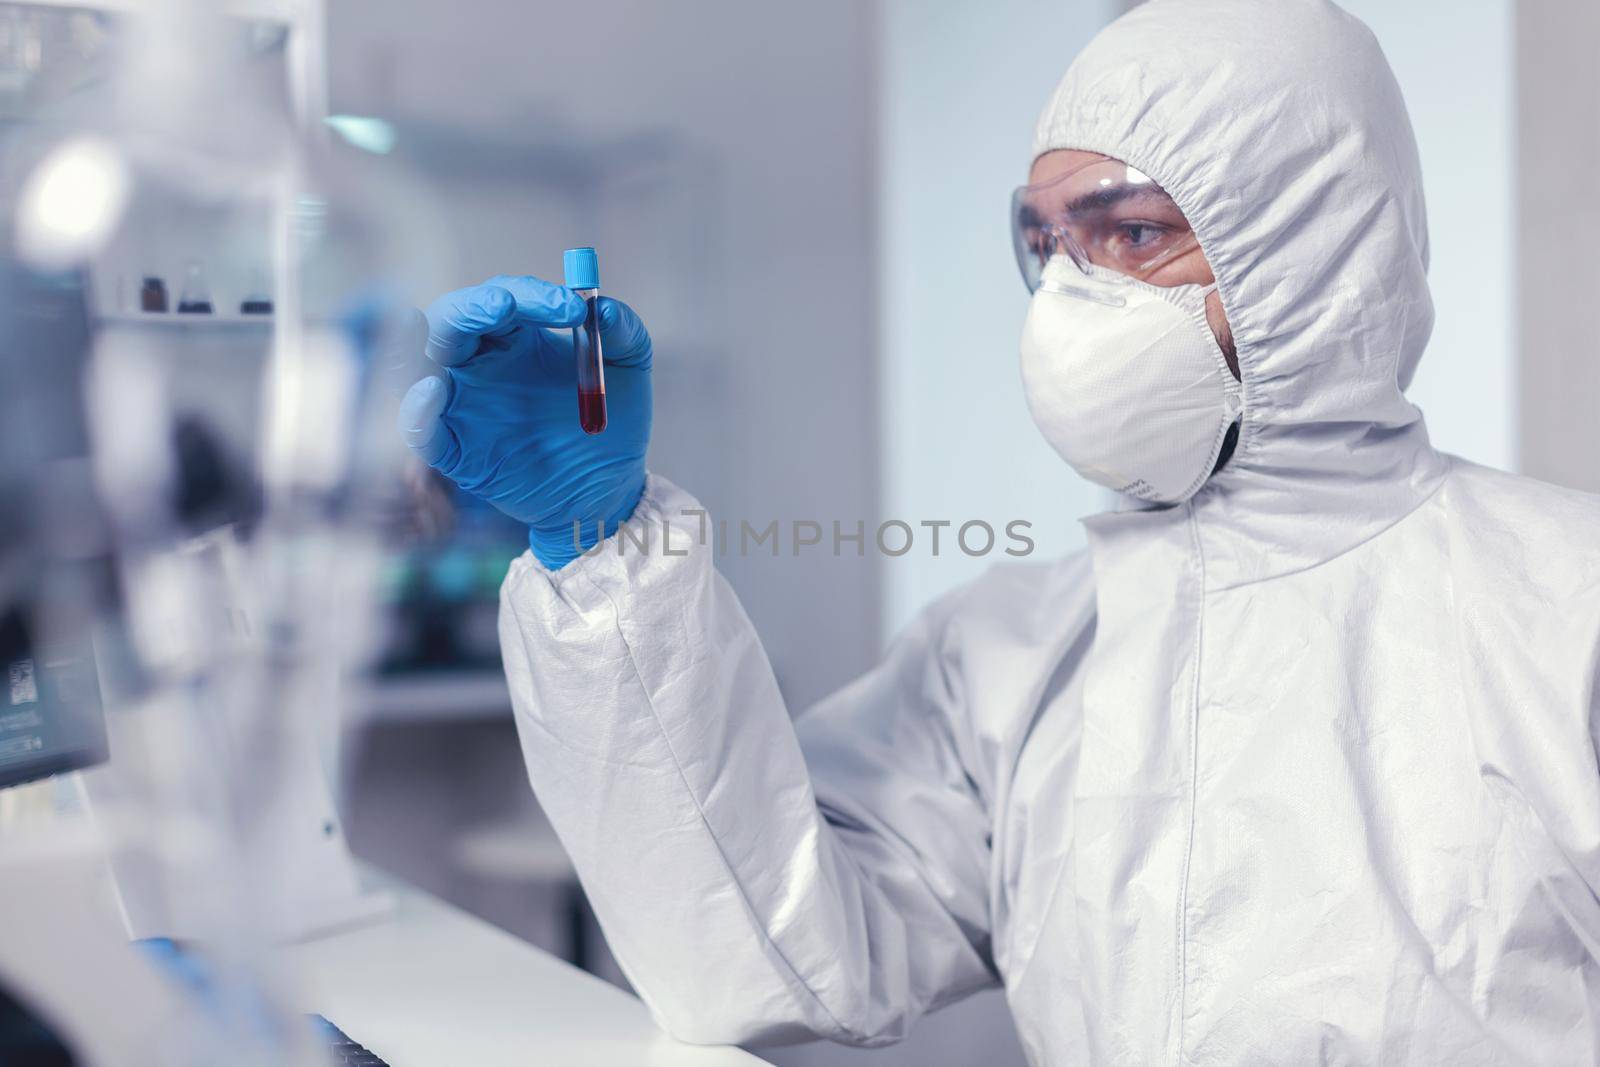 Epidemiologist analysing blood in test tube infected with coronavirus by DCStudio